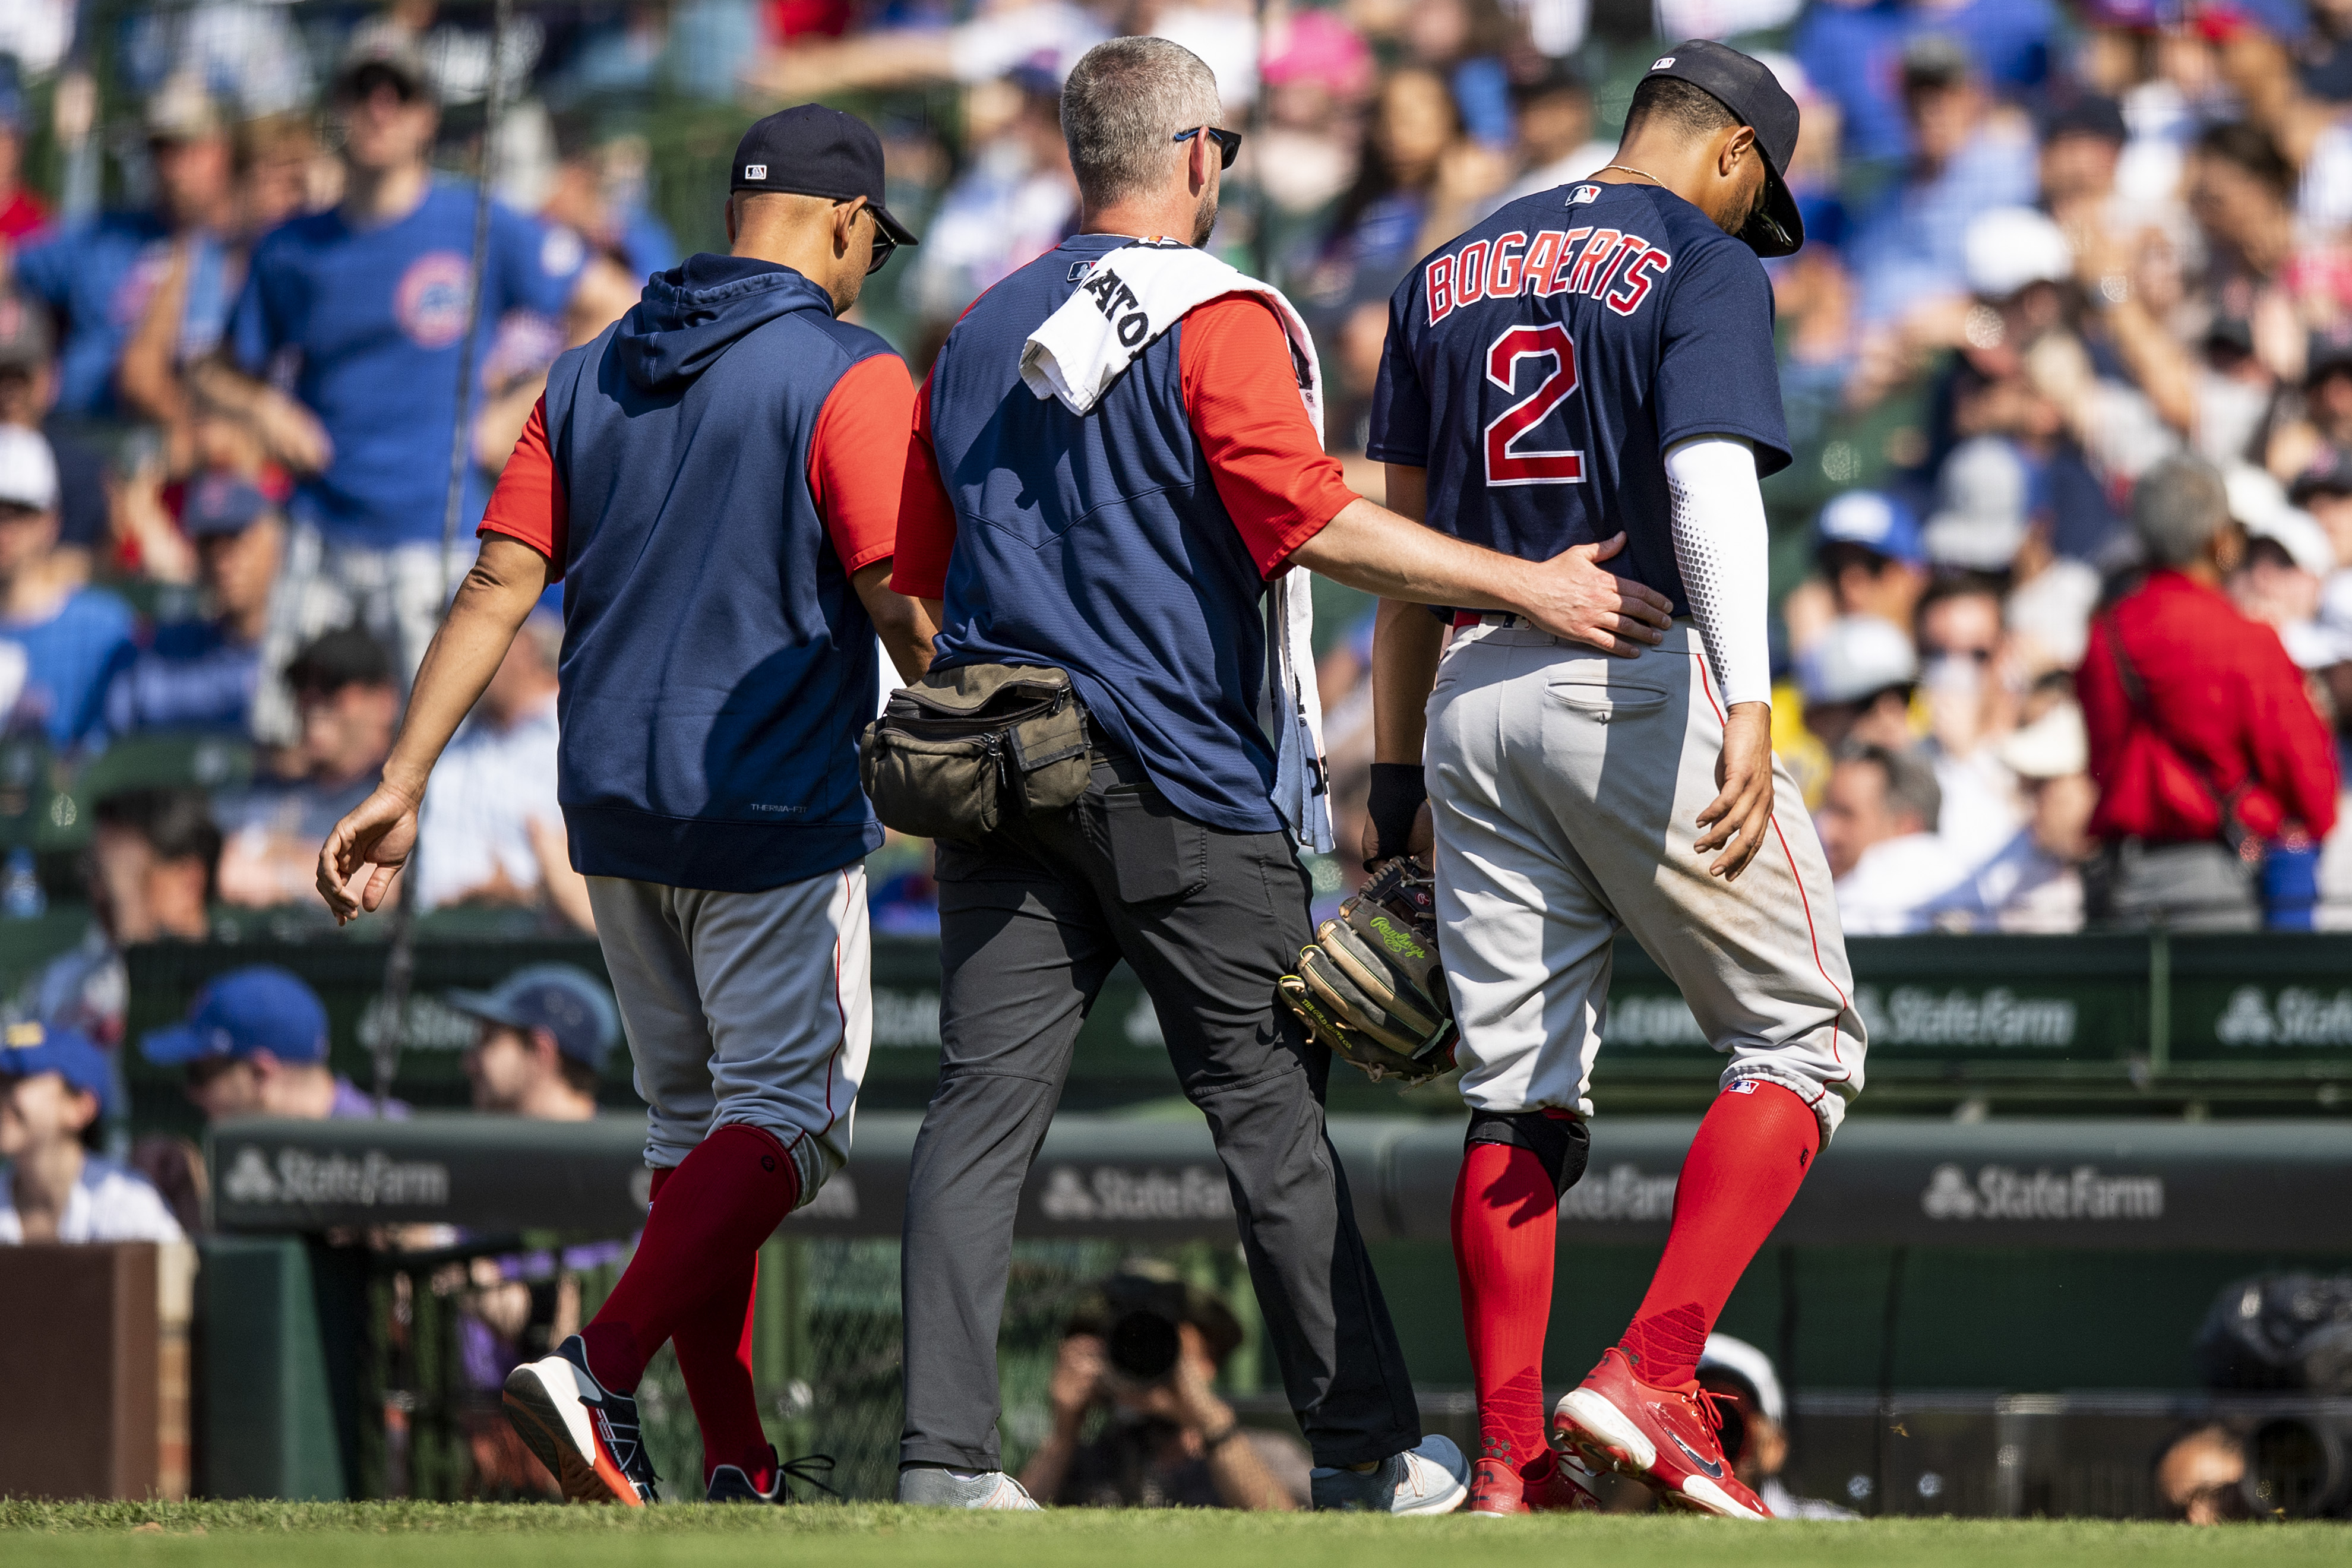 Xander Bogaerts injury: Red Sox shortstop dealing with sore